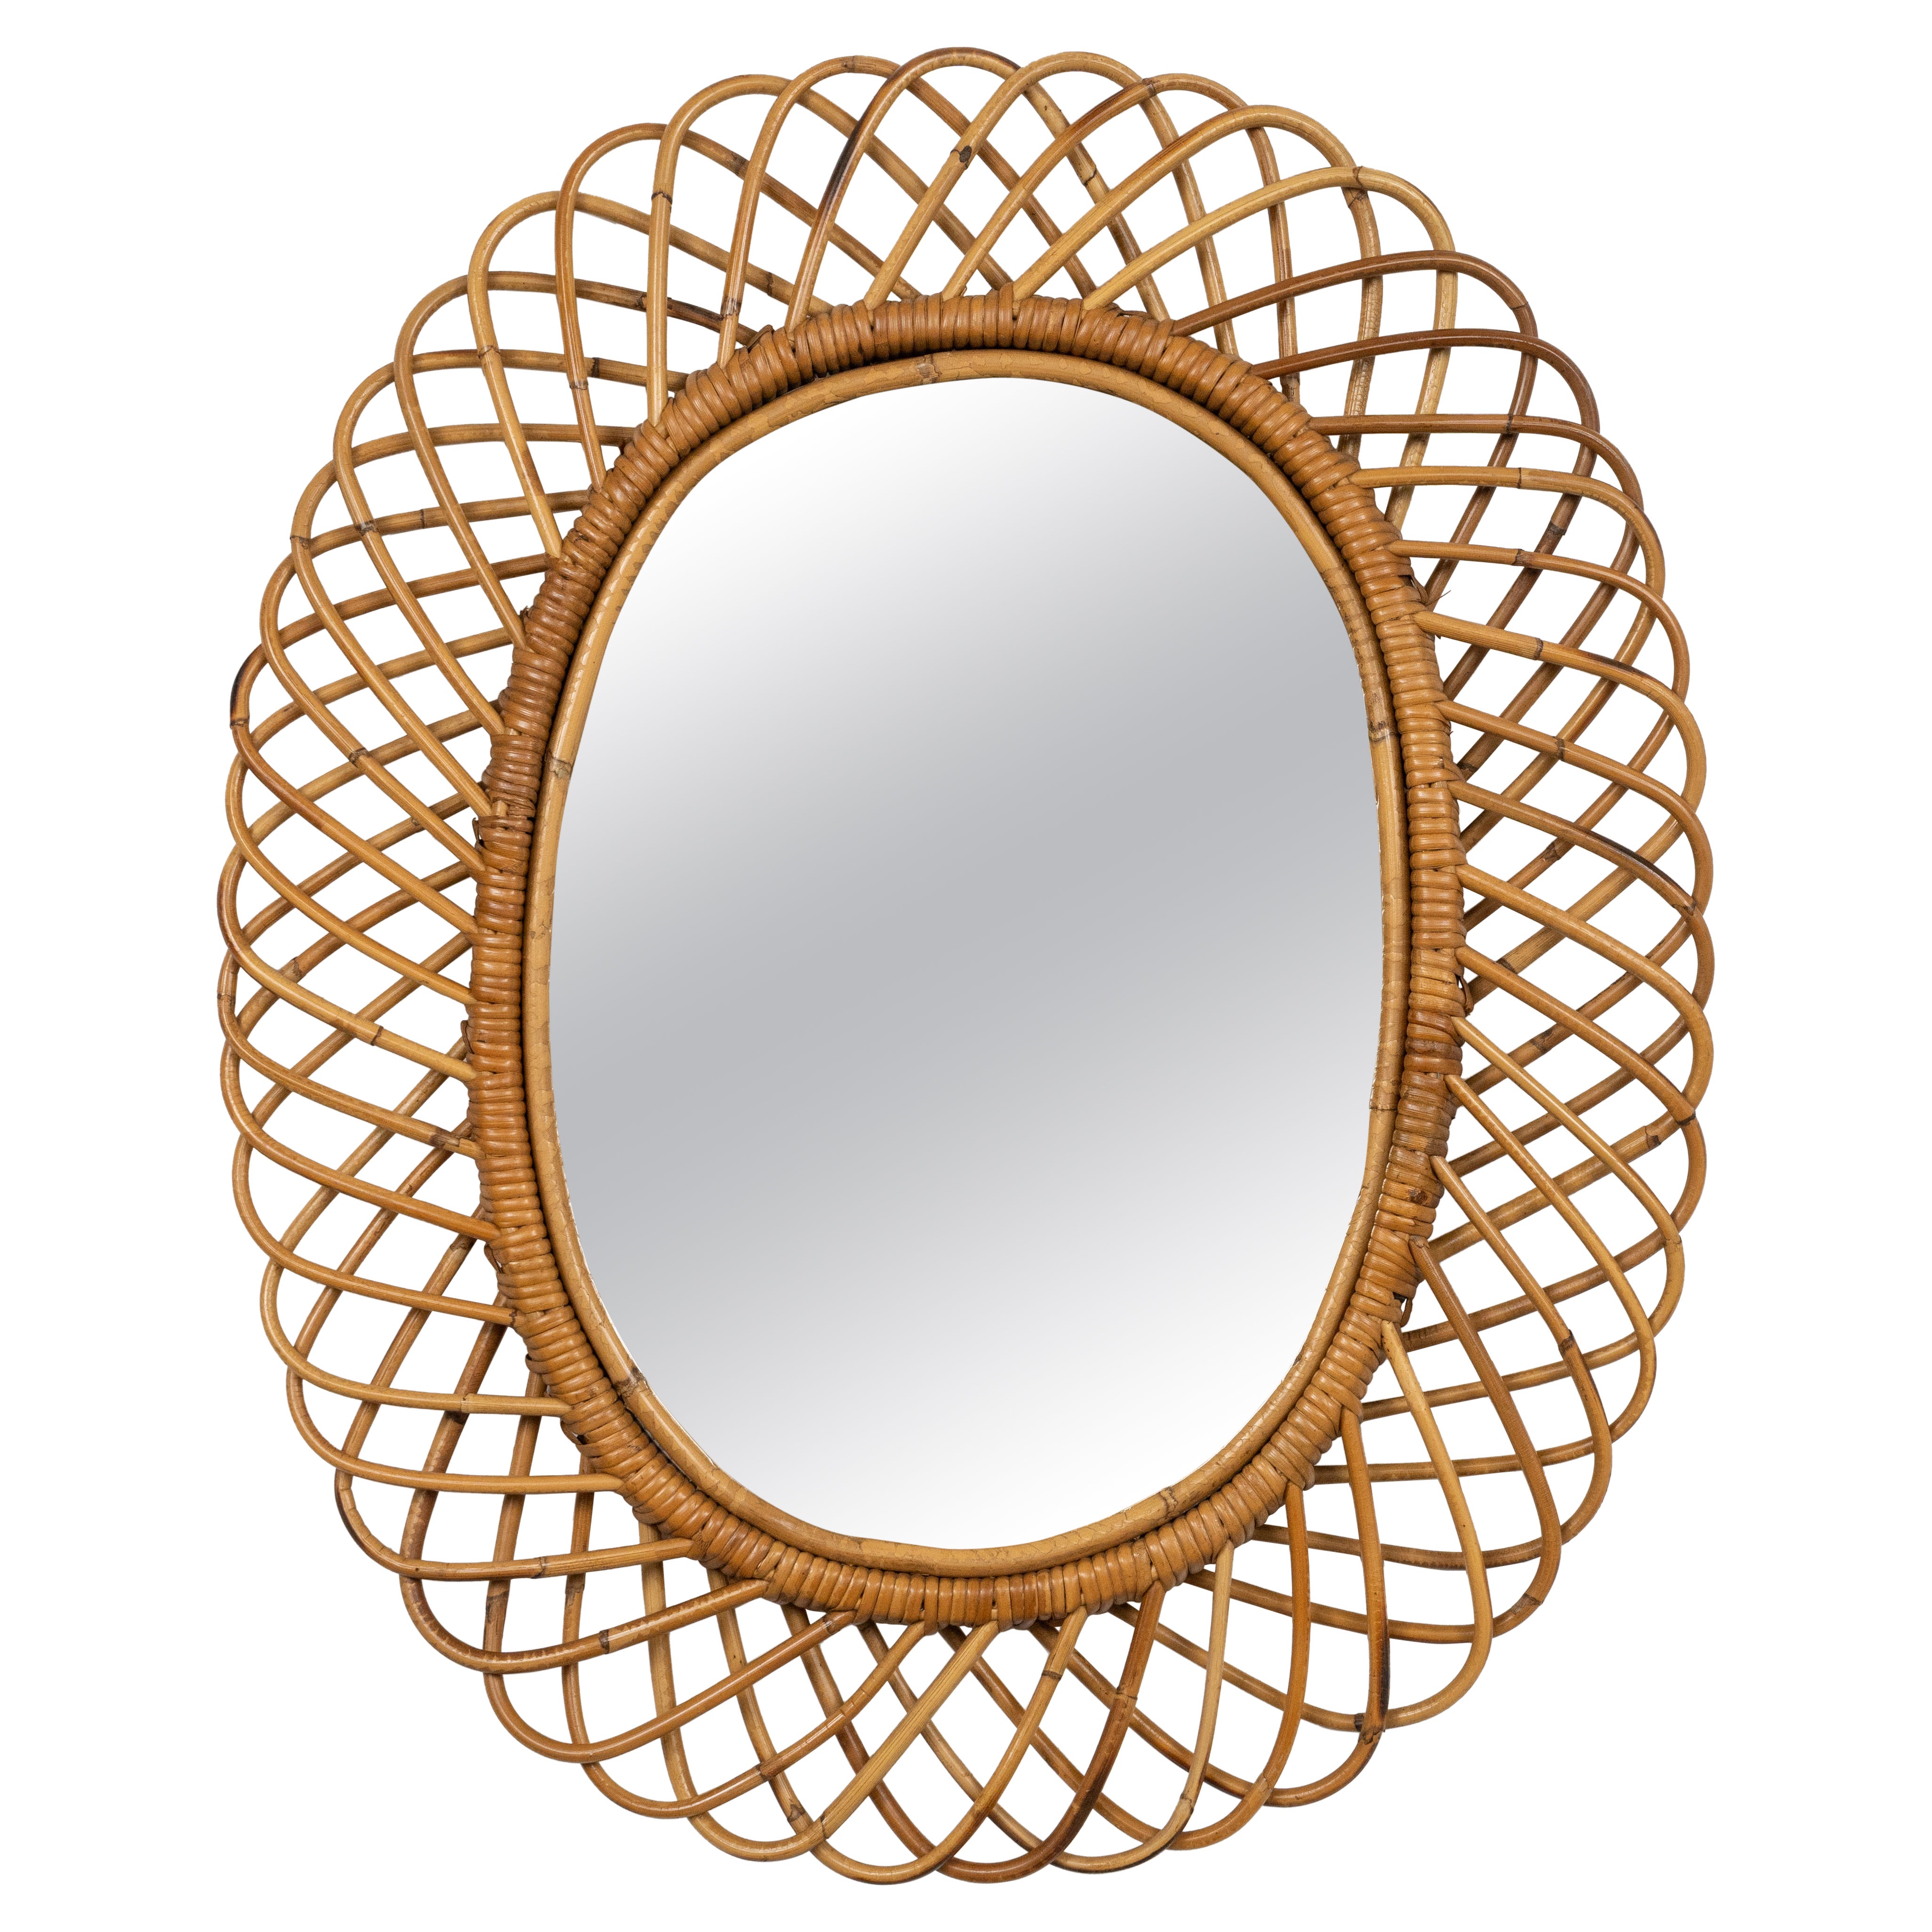 Midcentury Rattan and Bamboo Oval Wall Mirror by Franco Albini, Italy 1960s For Sale